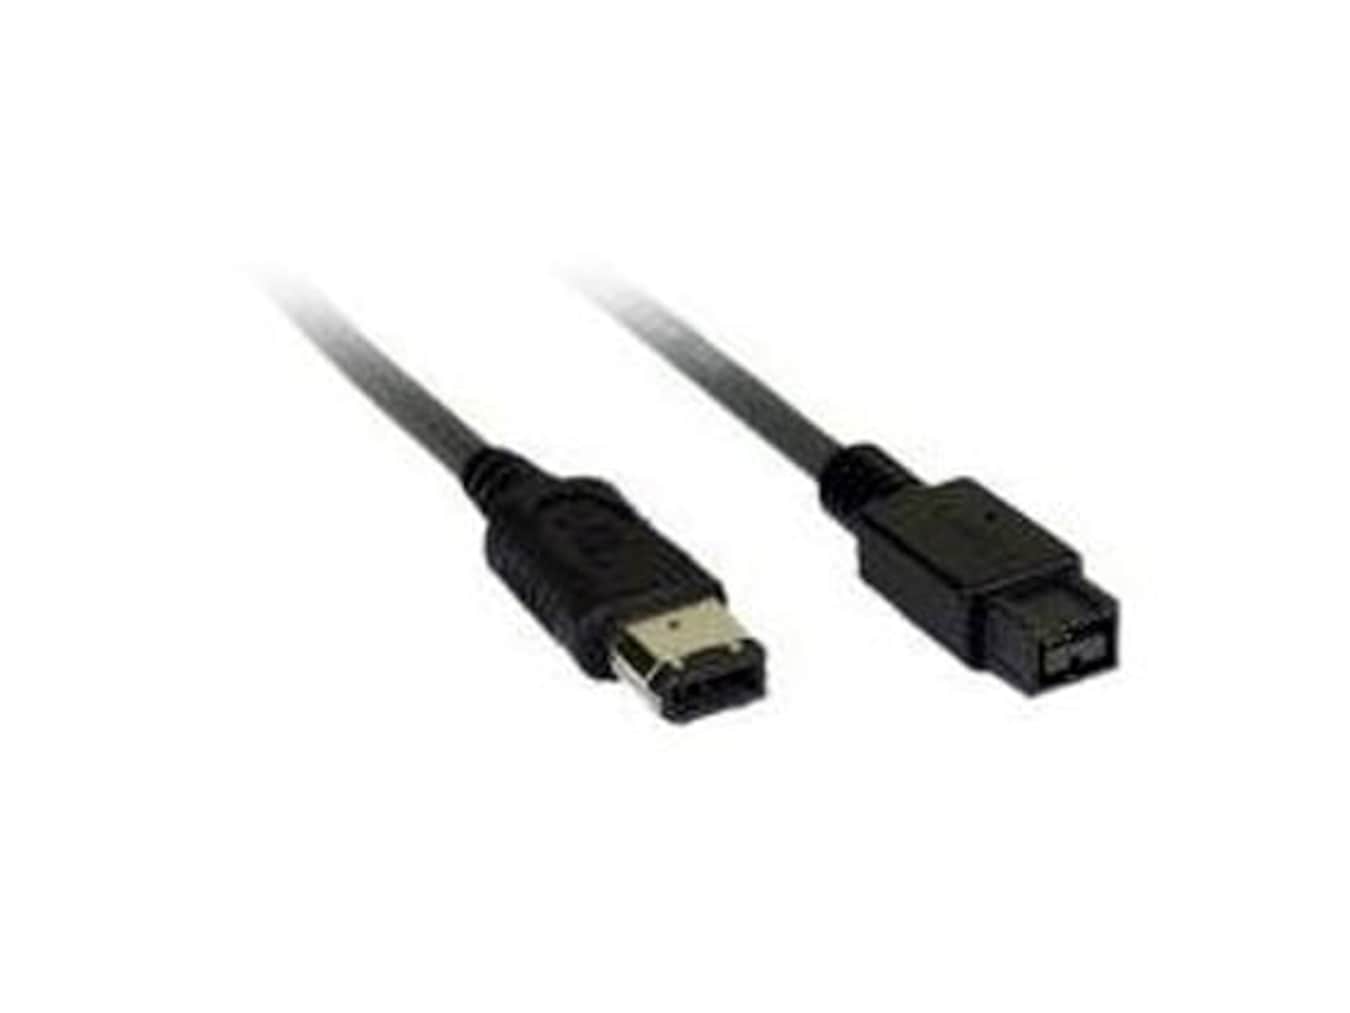 Firewire 800 to Firewire 400 cable